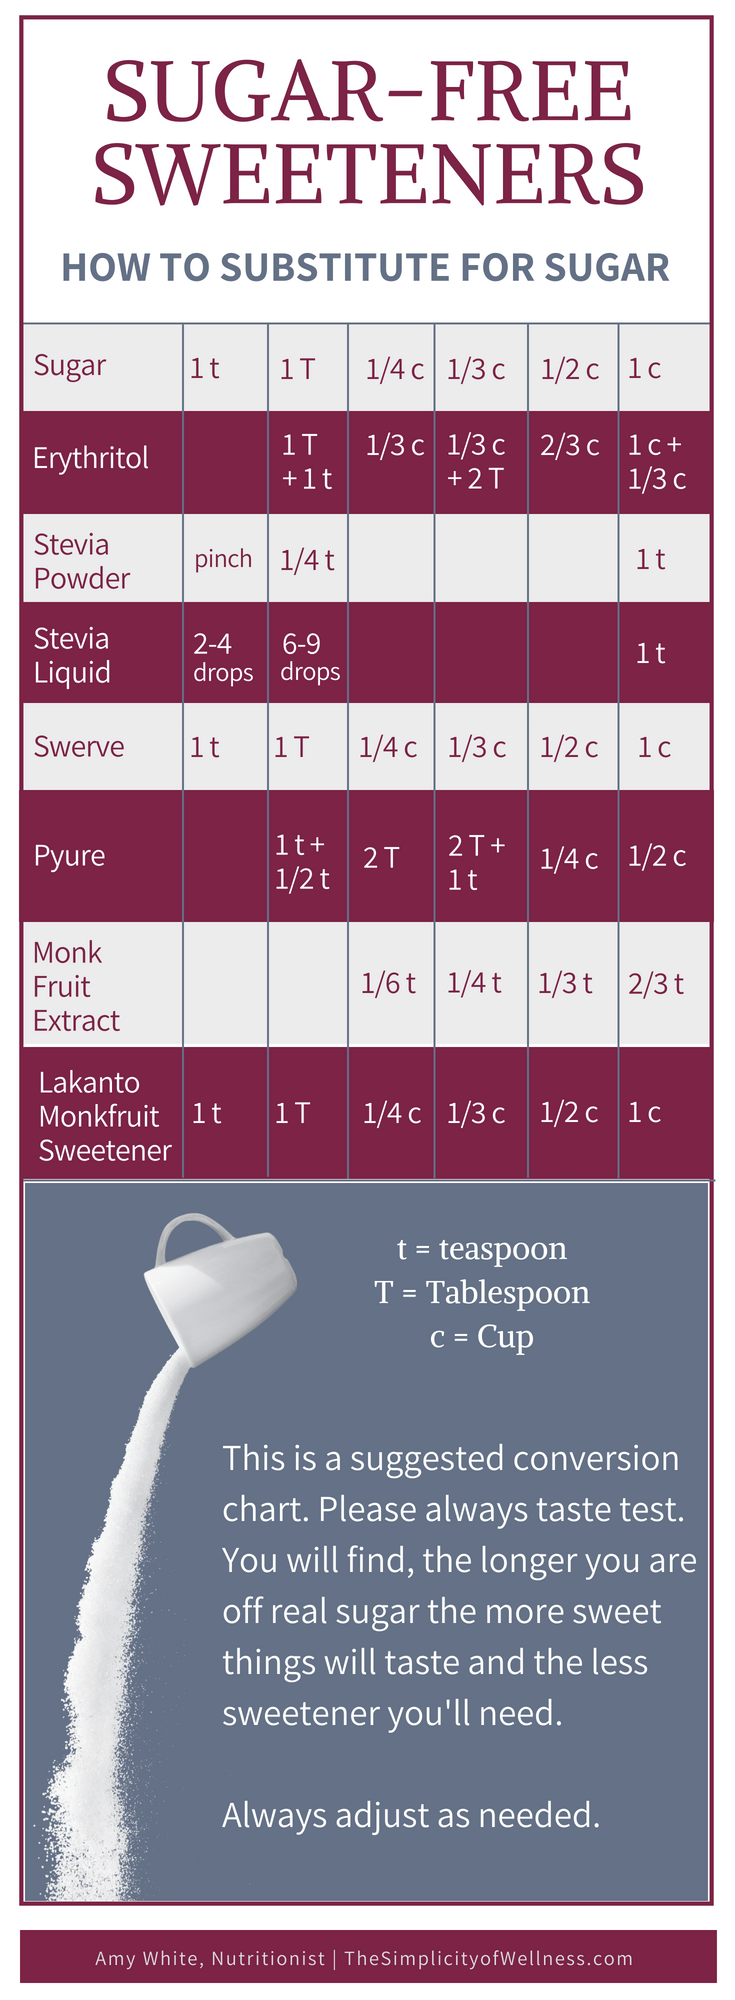 Sugar-free sweetener conversion chart | how to substitute for sugar | zero carb sweeteners